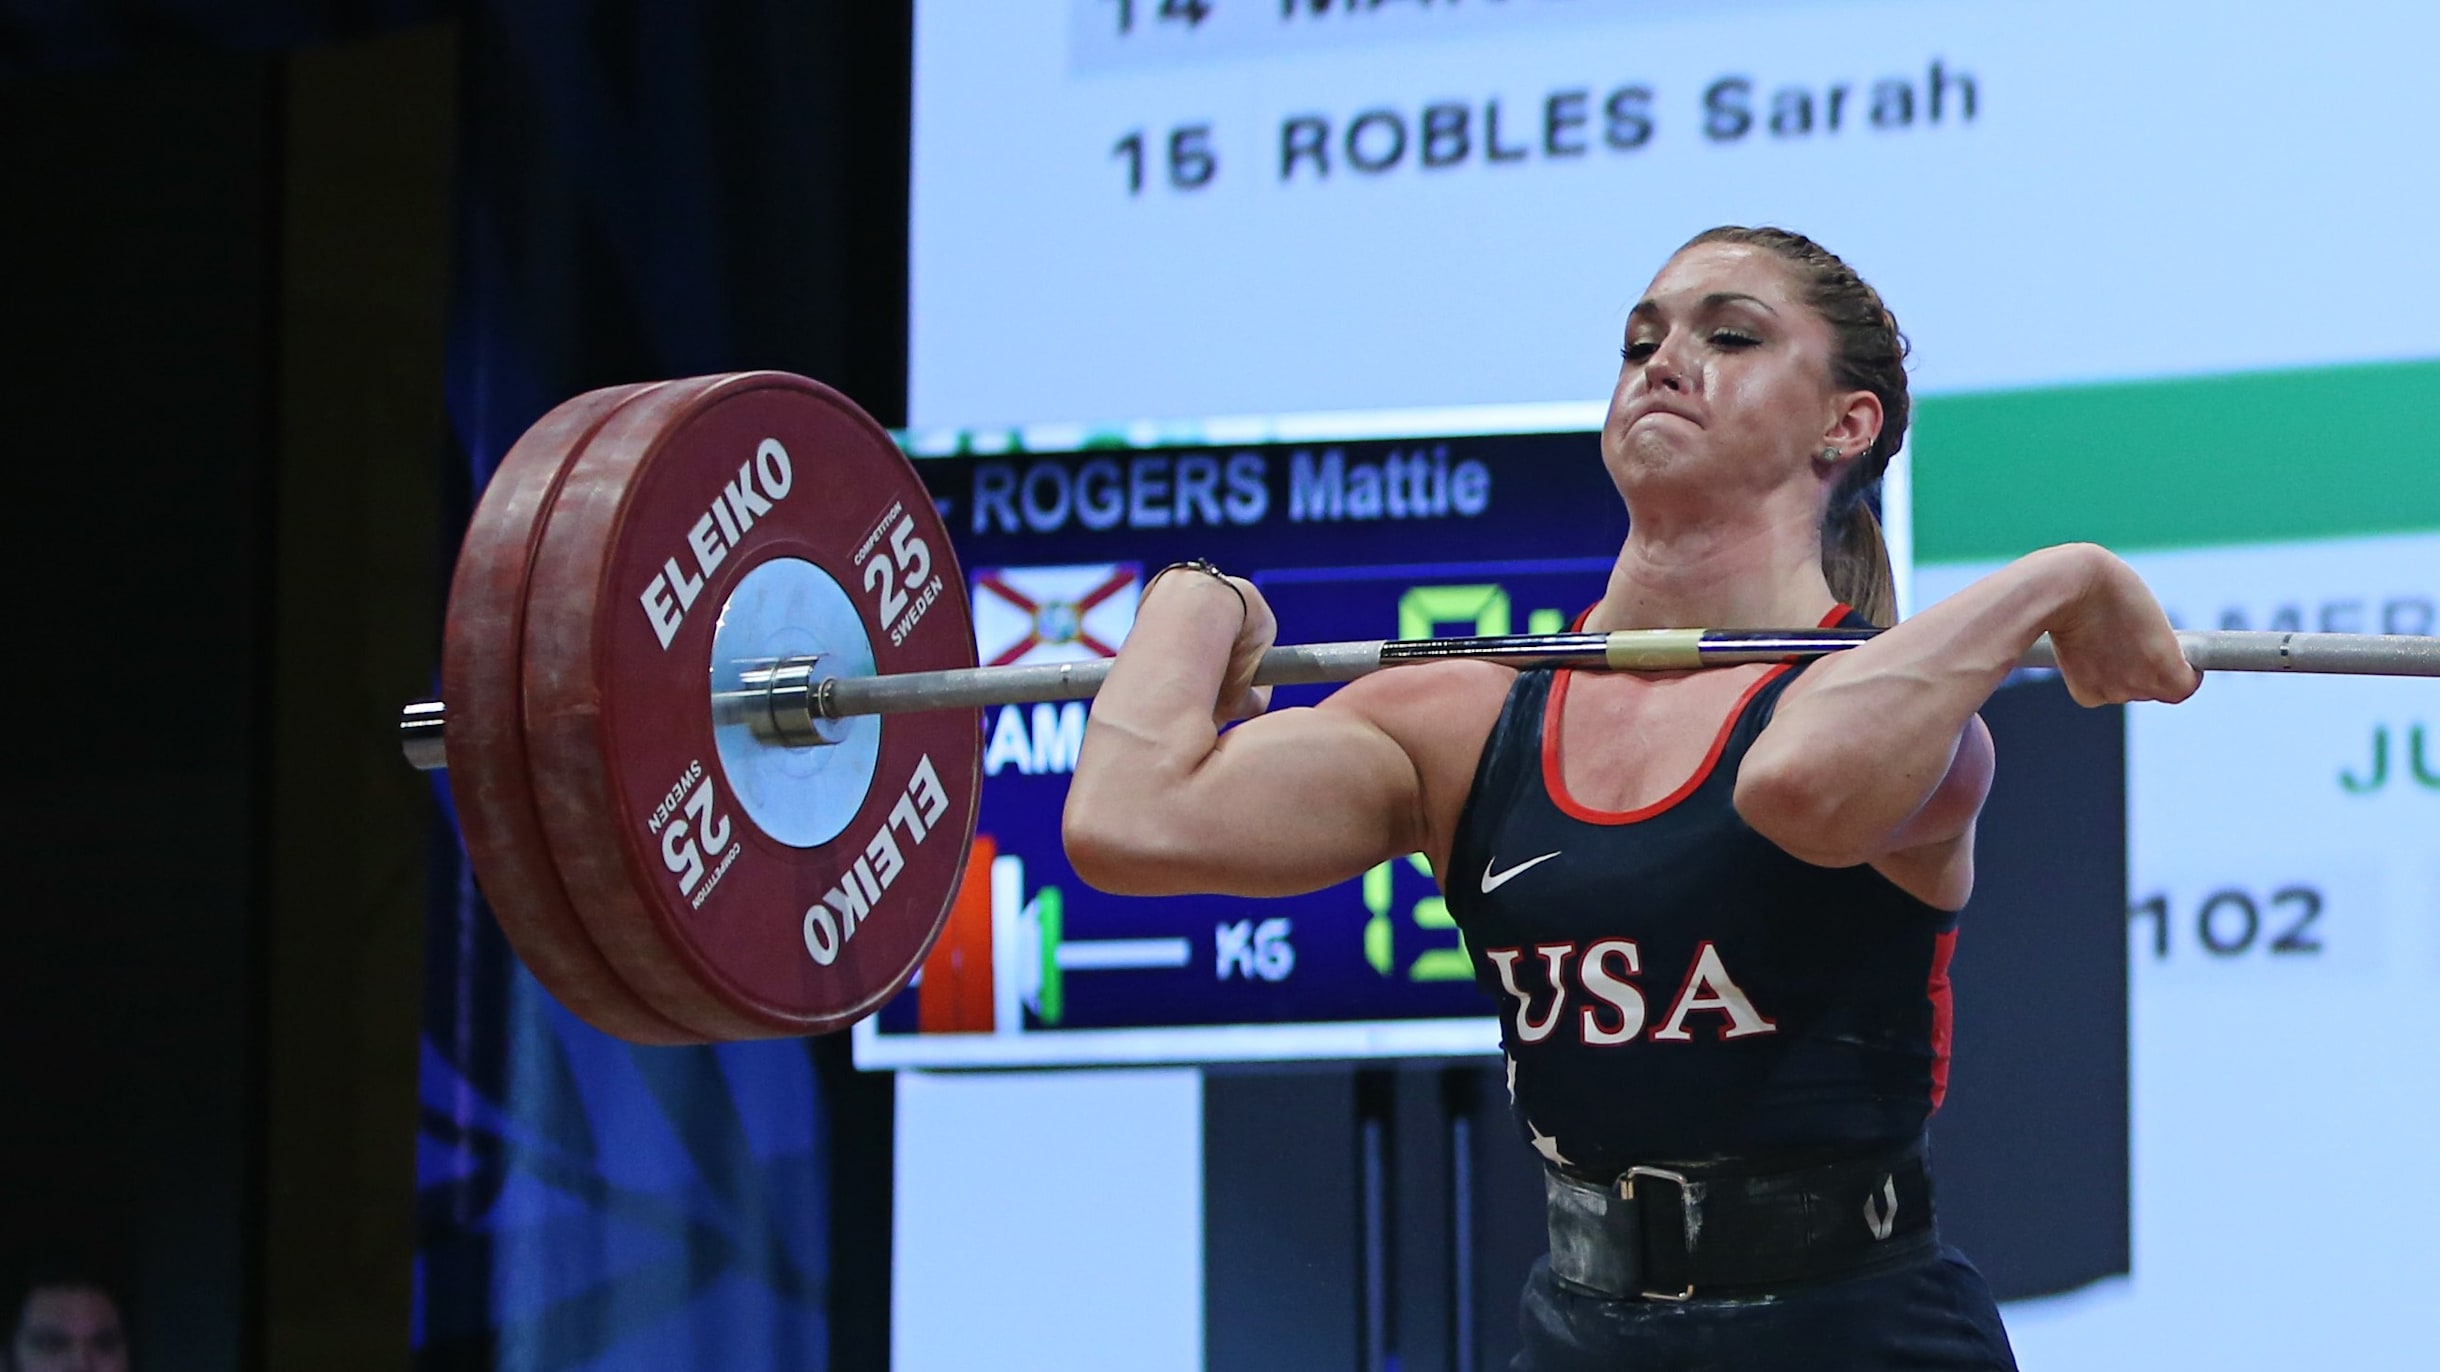 Weightlifter Mattie Rogers is one very busy woman